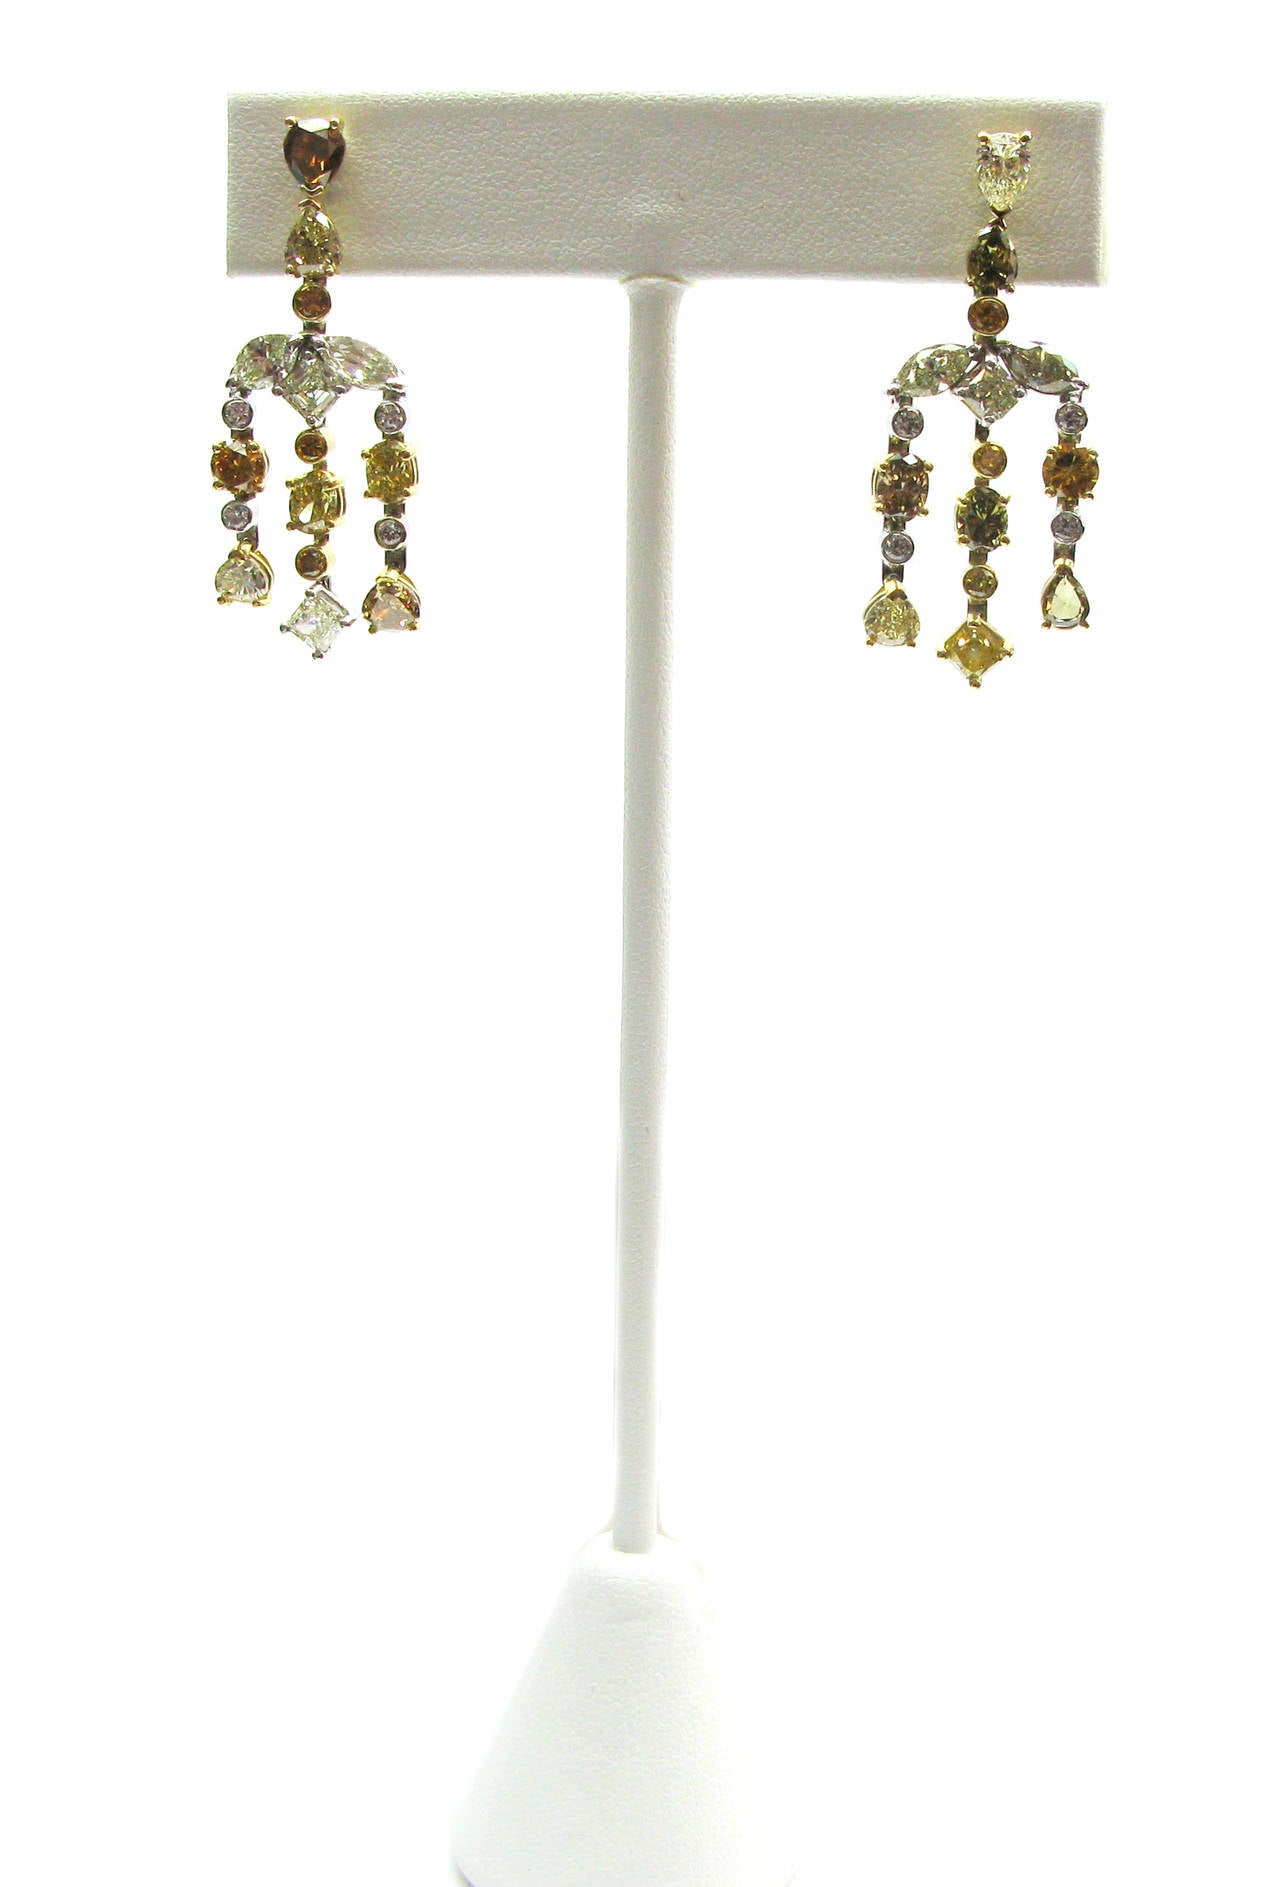 This 18kt two-tone gold handmade pair of 9.84ctw diamond chandelier earrings is truly one-of-a-kind. It features a mix of prong-set natural fancy colored diamonds in a variety of shapes and sizes with bezel-set round brilliant diamond set between